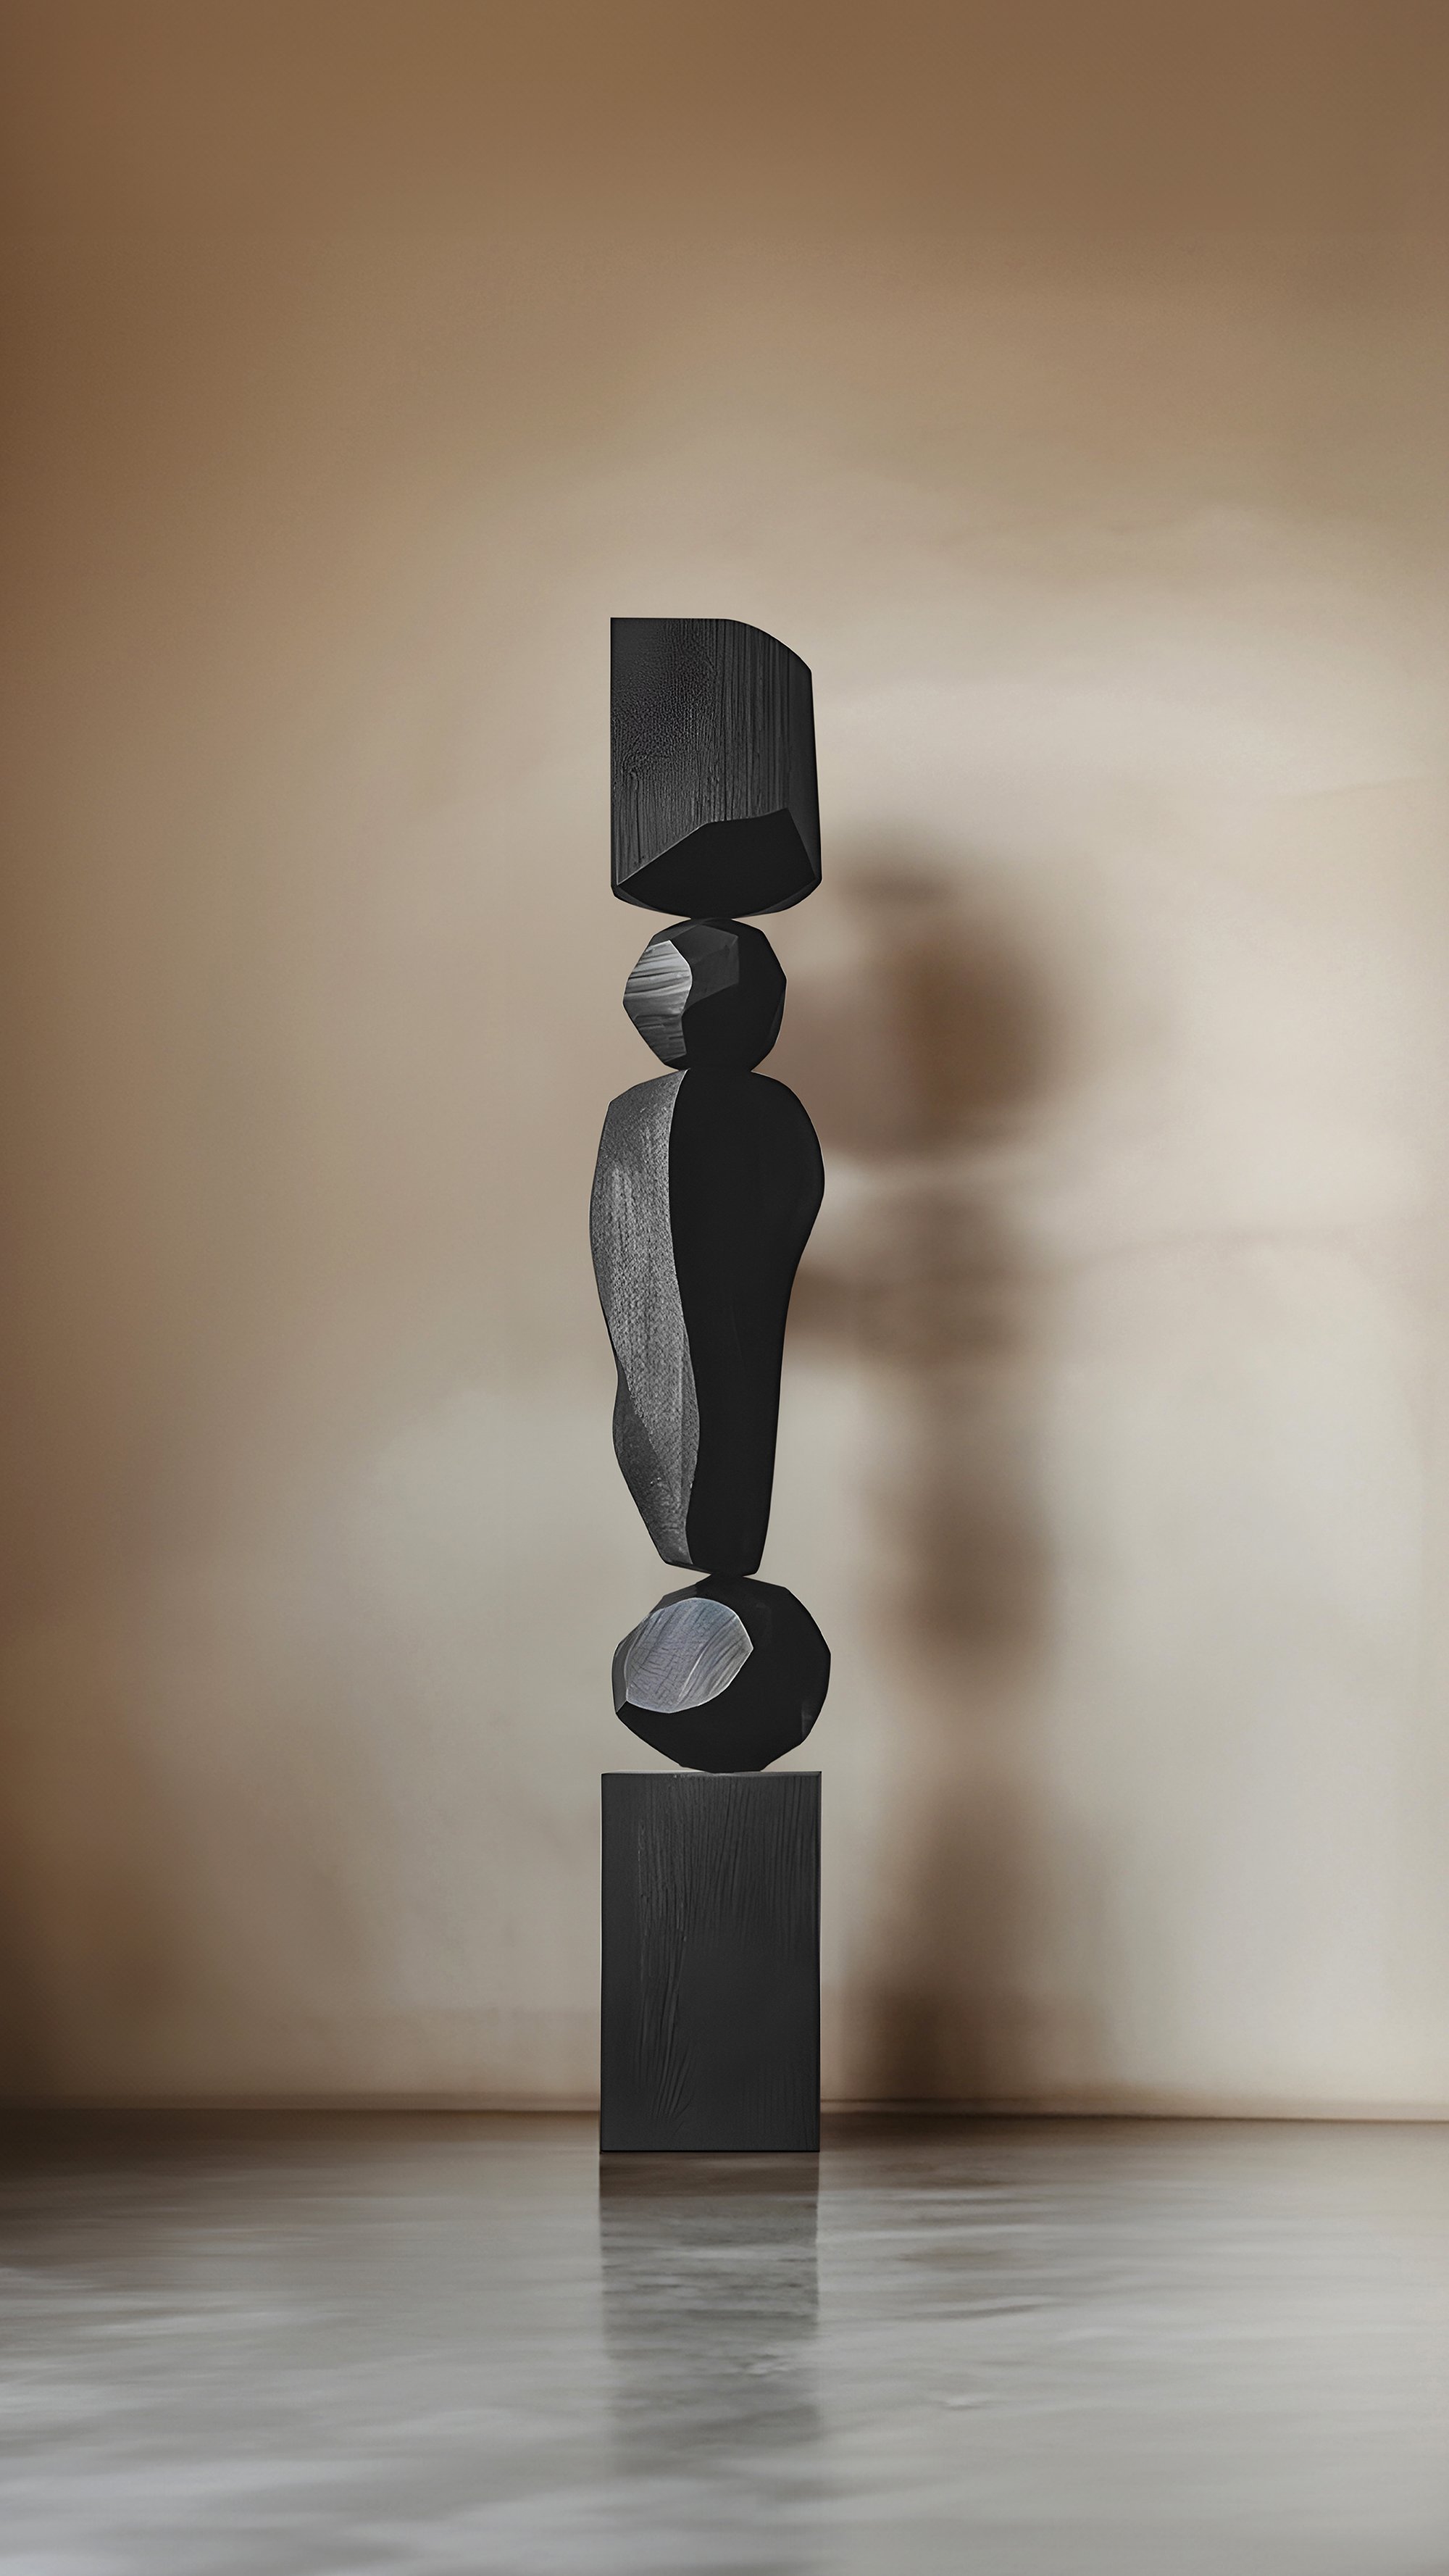 The Dark Elegance of Abstract Black Solid Wood Captured by Escalona, Still Stand No102 - 5.jpg